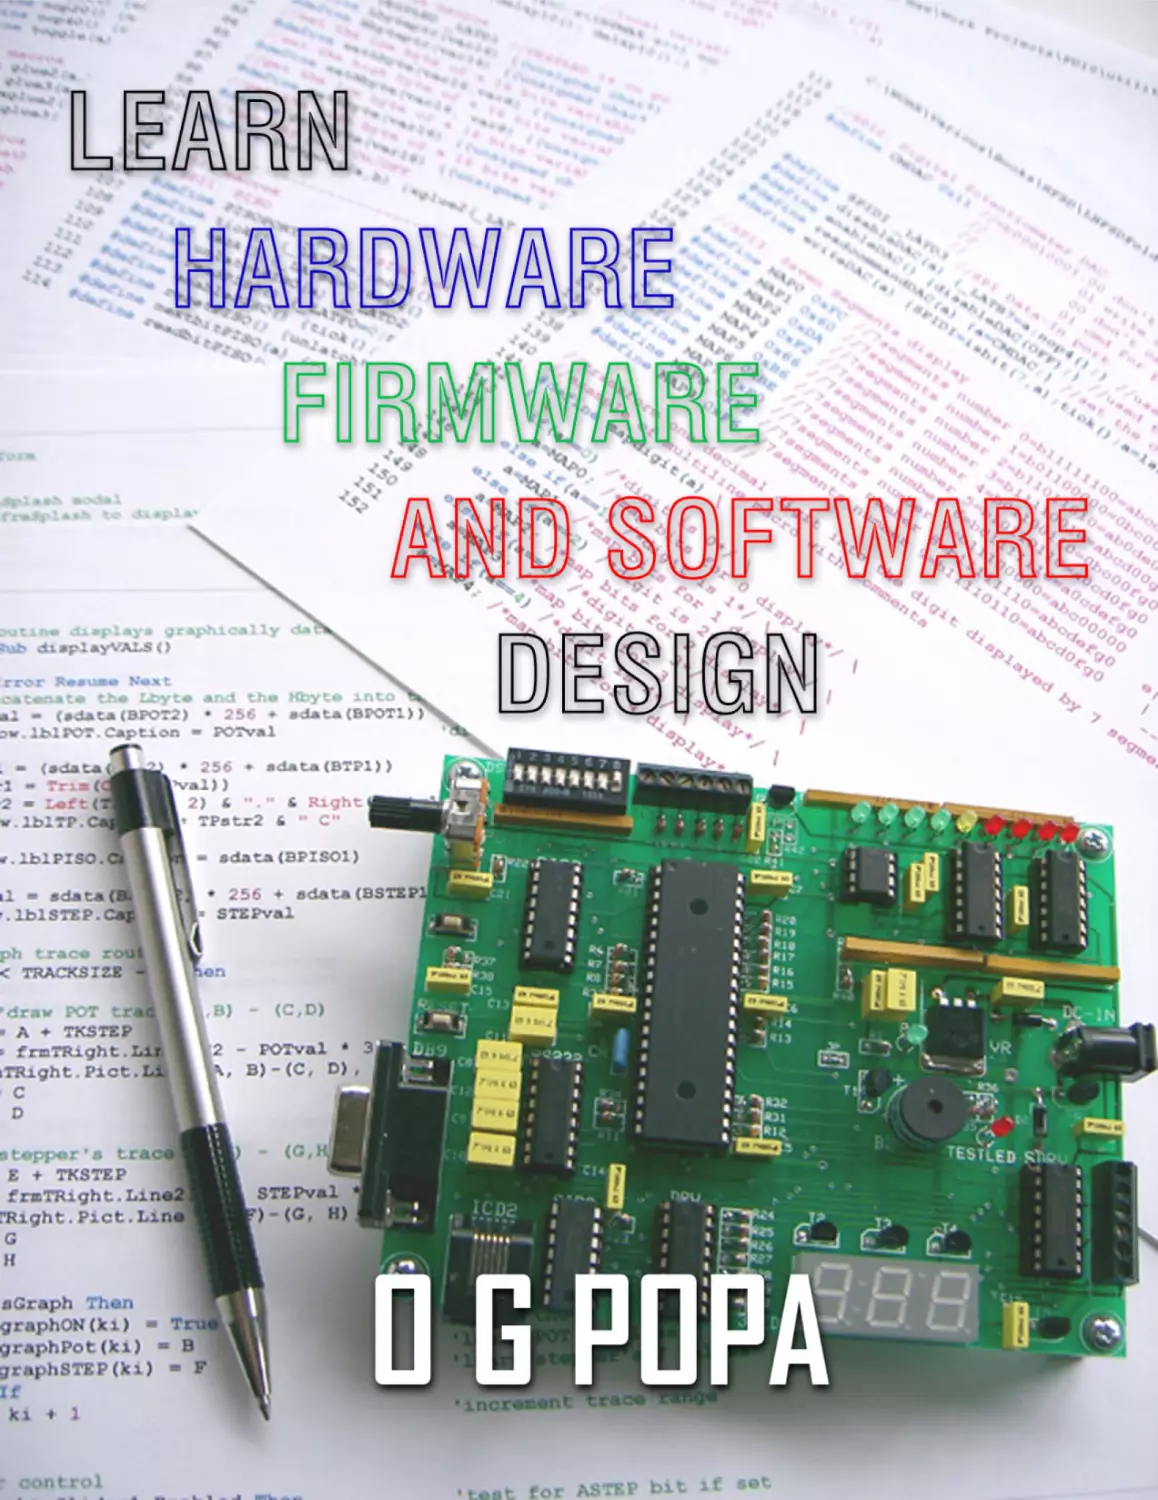 LEARN
HARDWARE FIRMWARE AND SOFTWARE
DESIGN